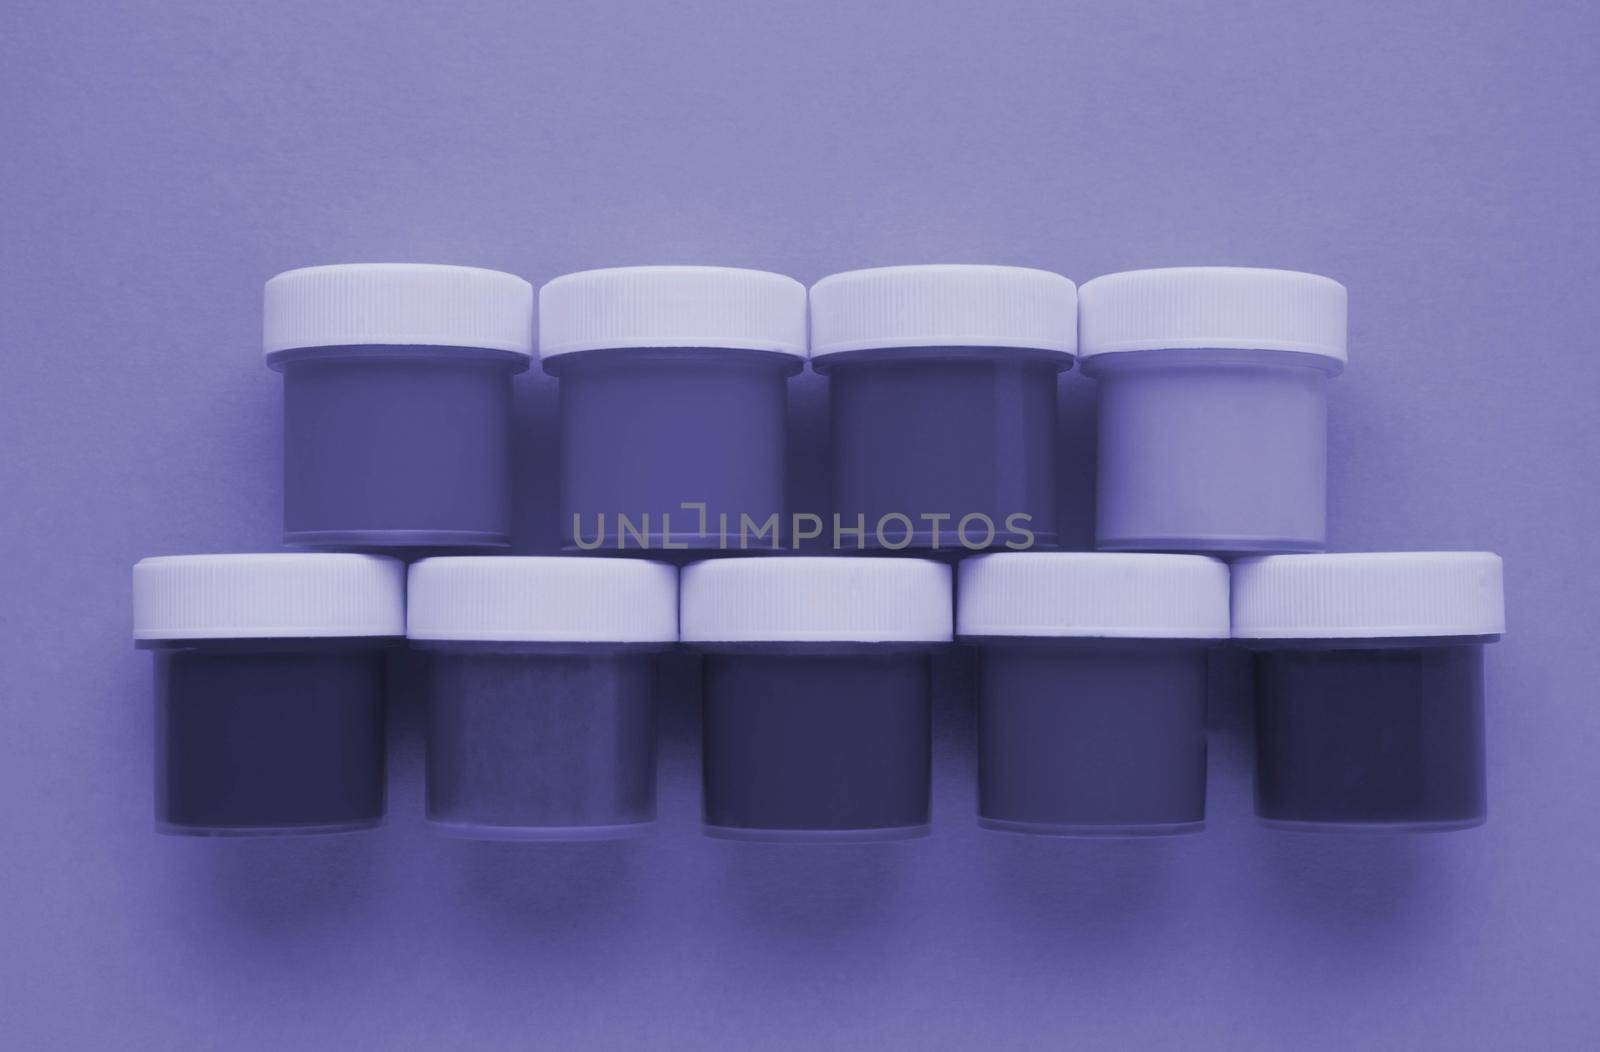 Closed plastic jars with gouache paint of different lilac shades for creativity on a lilac background. Materials for drawing, creativity, development. Very peri